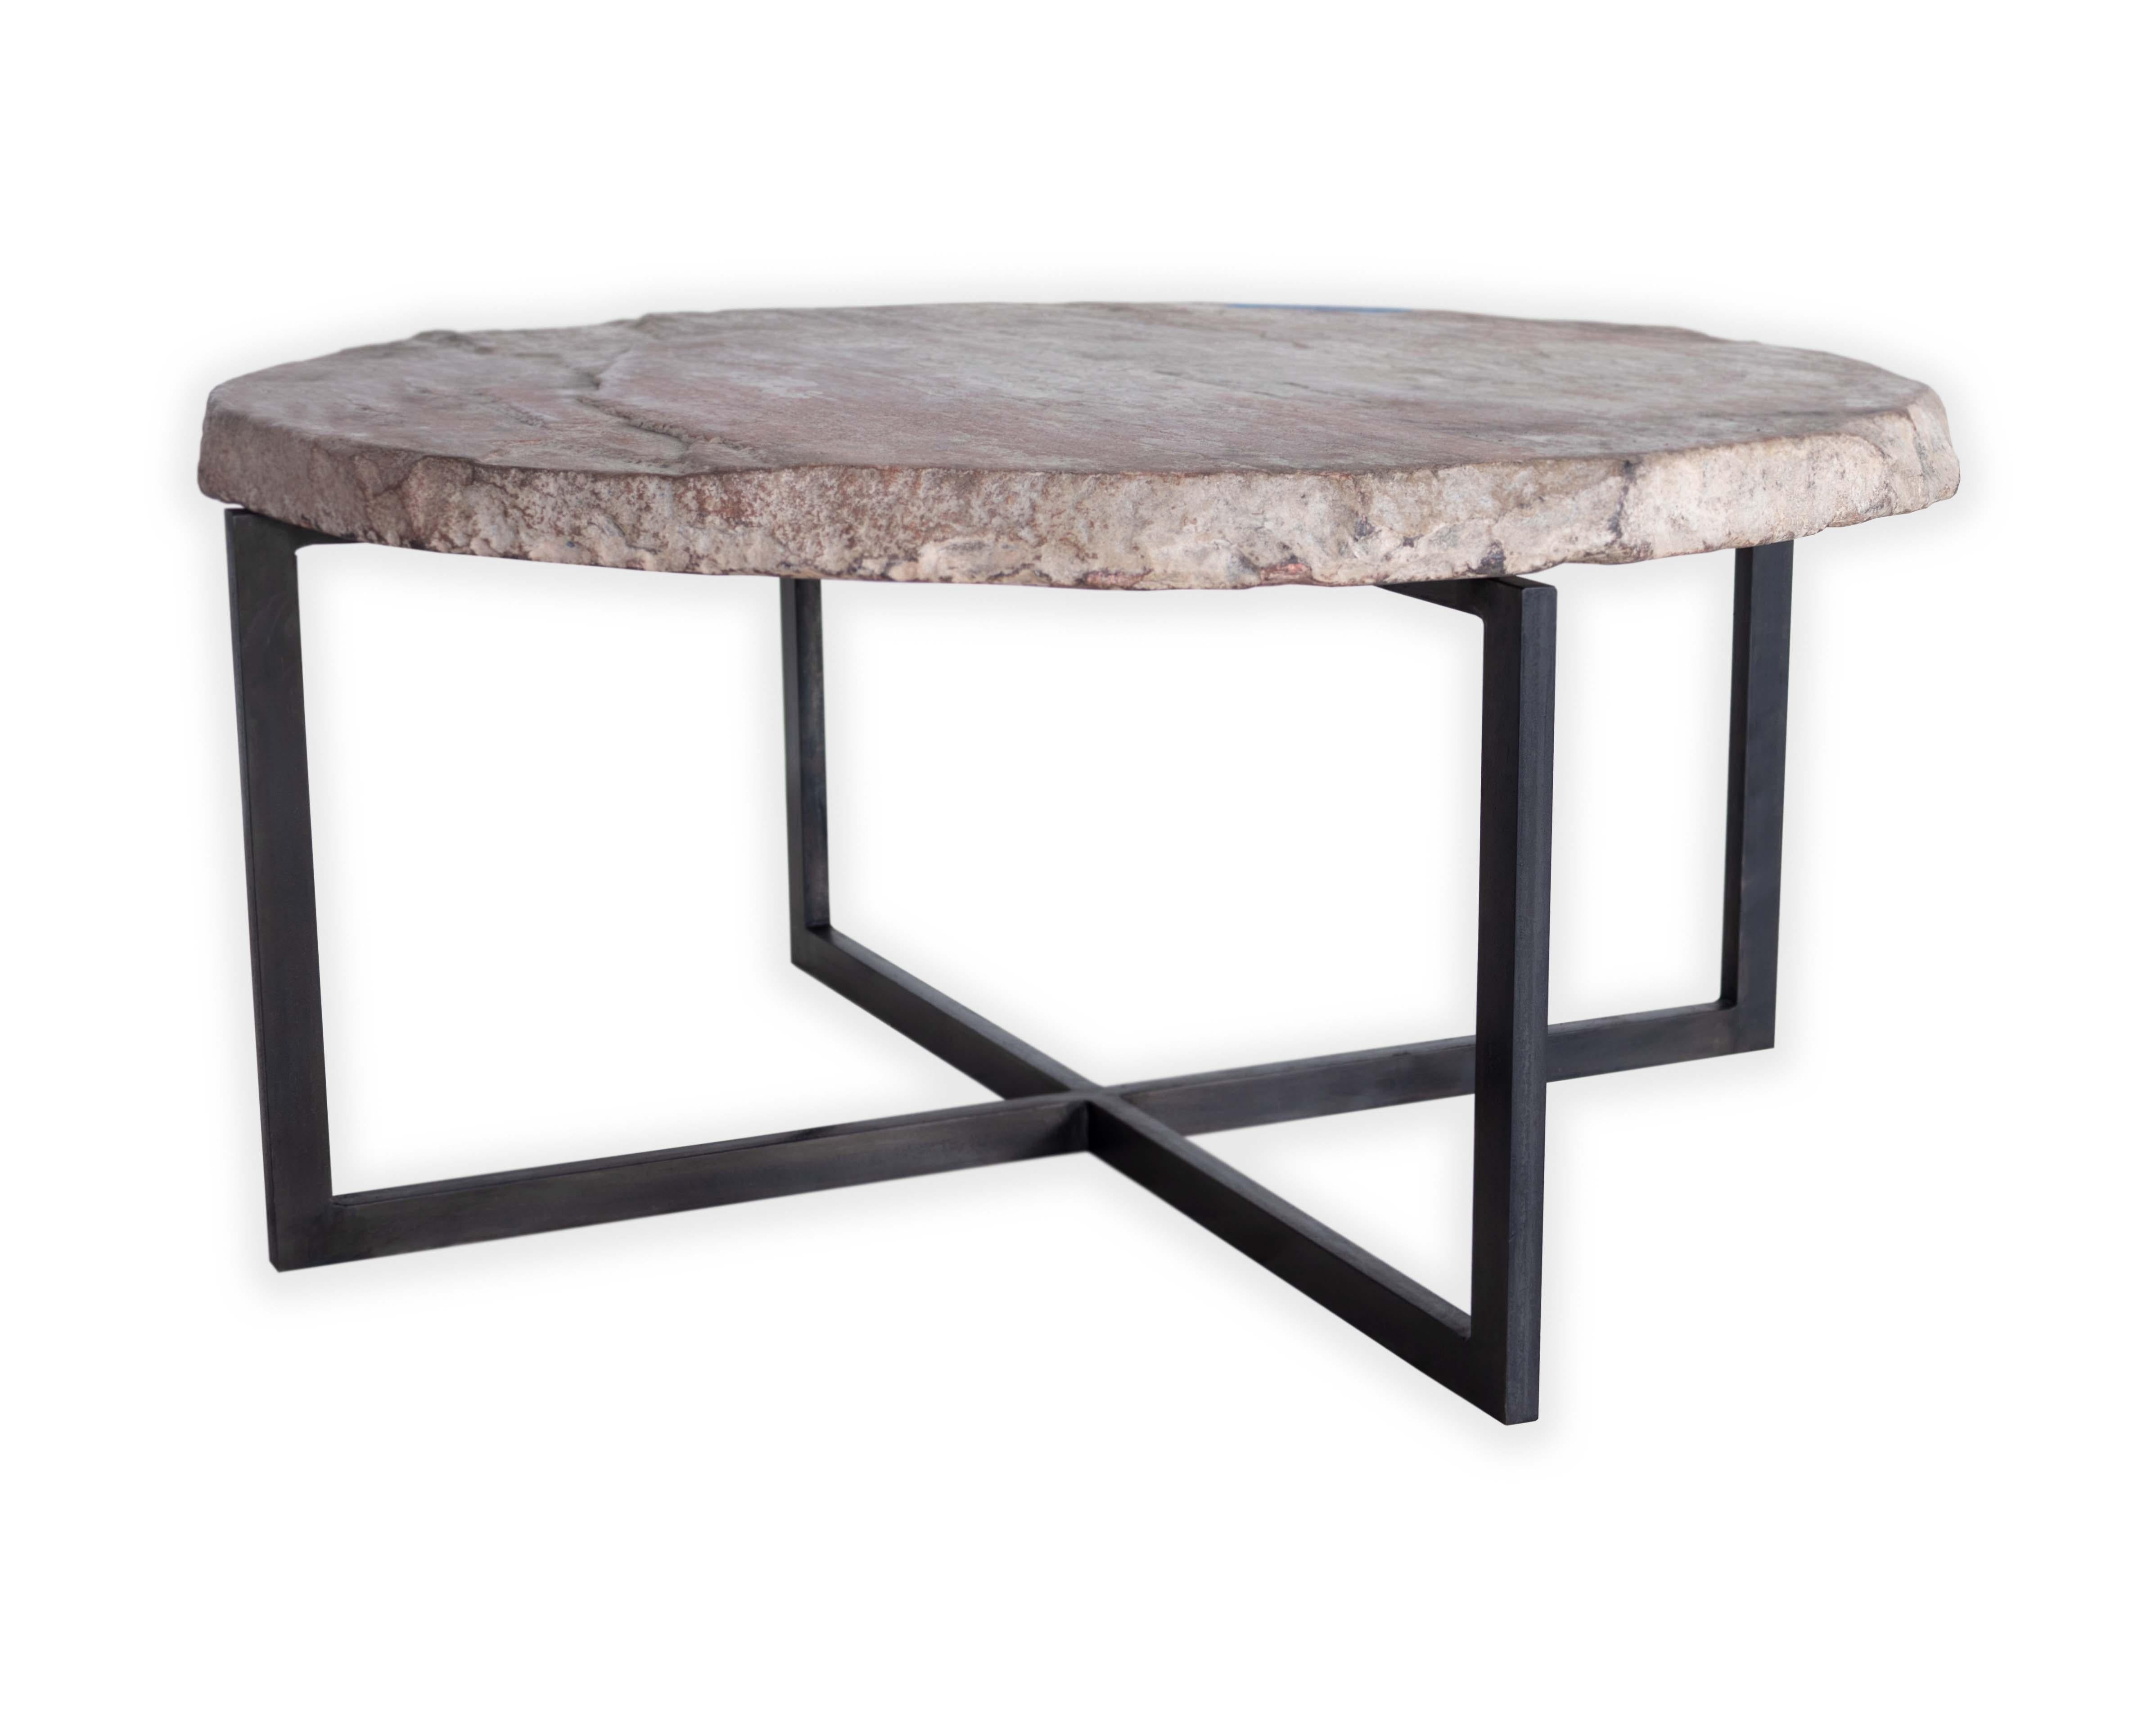 Rustic Architectural Stone on Steel Coffee Table